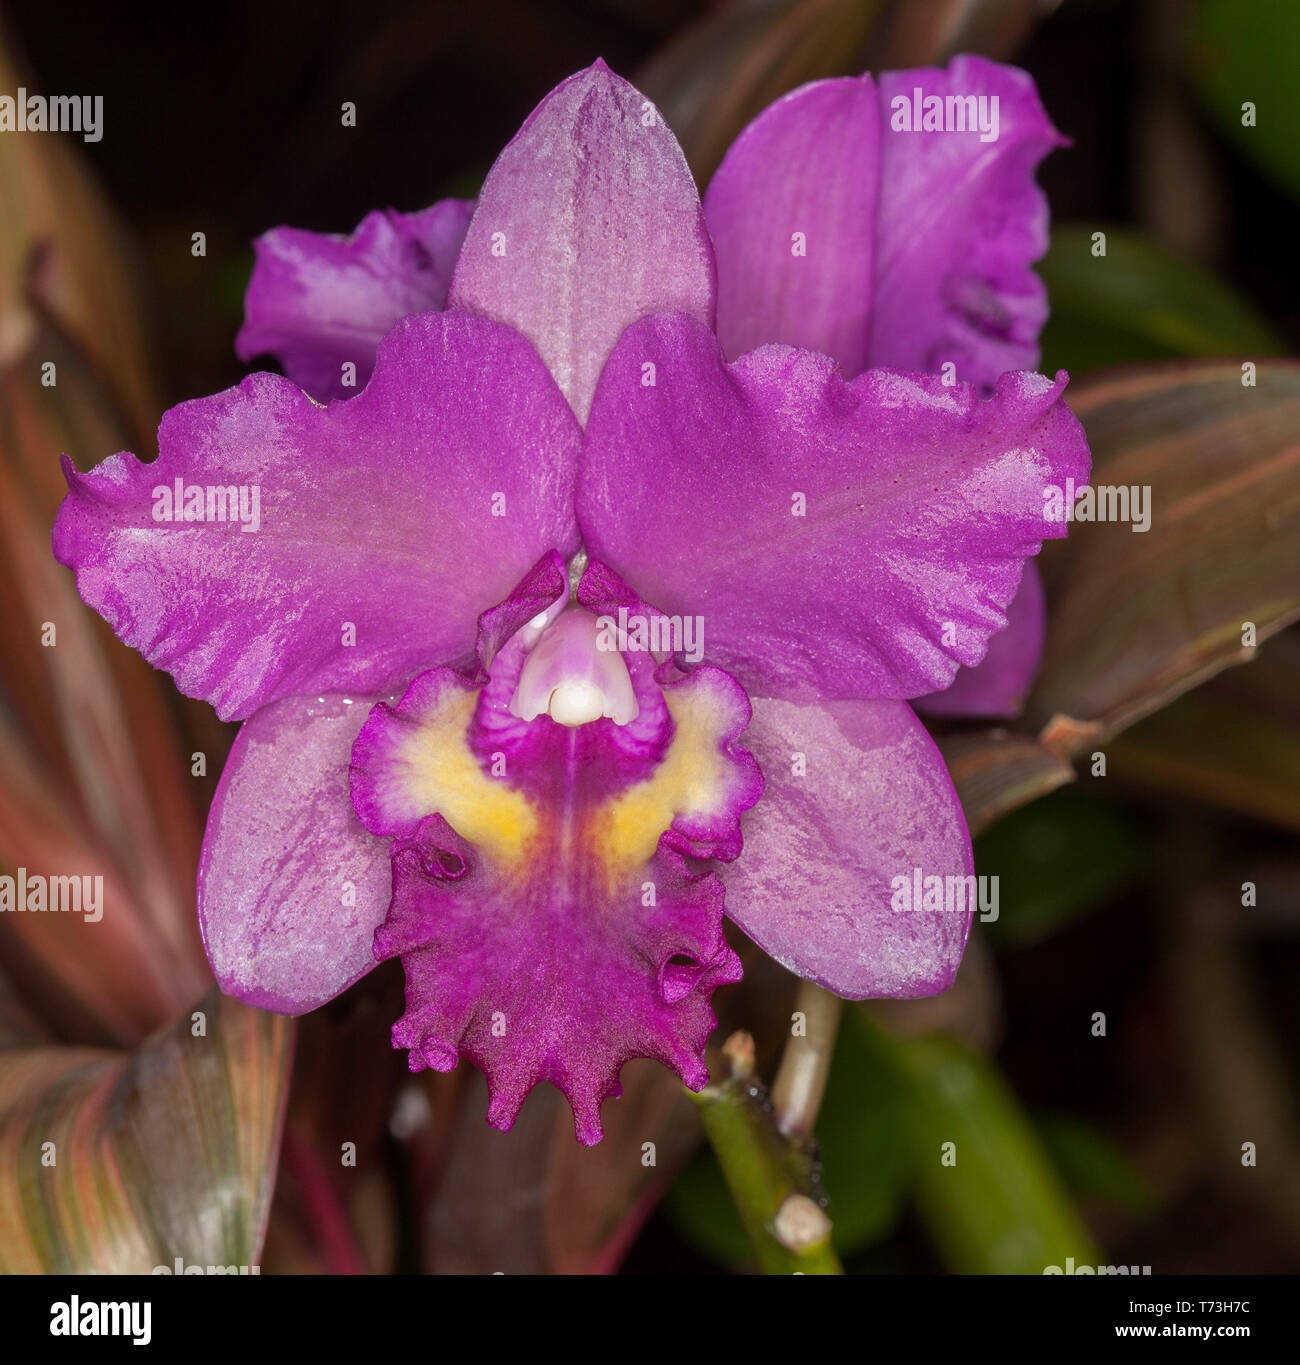 Spectacular purple / red orchid flower, Cattleya Narooma x Deception Drop 'Copper and Spots' on dark background Stock Photo